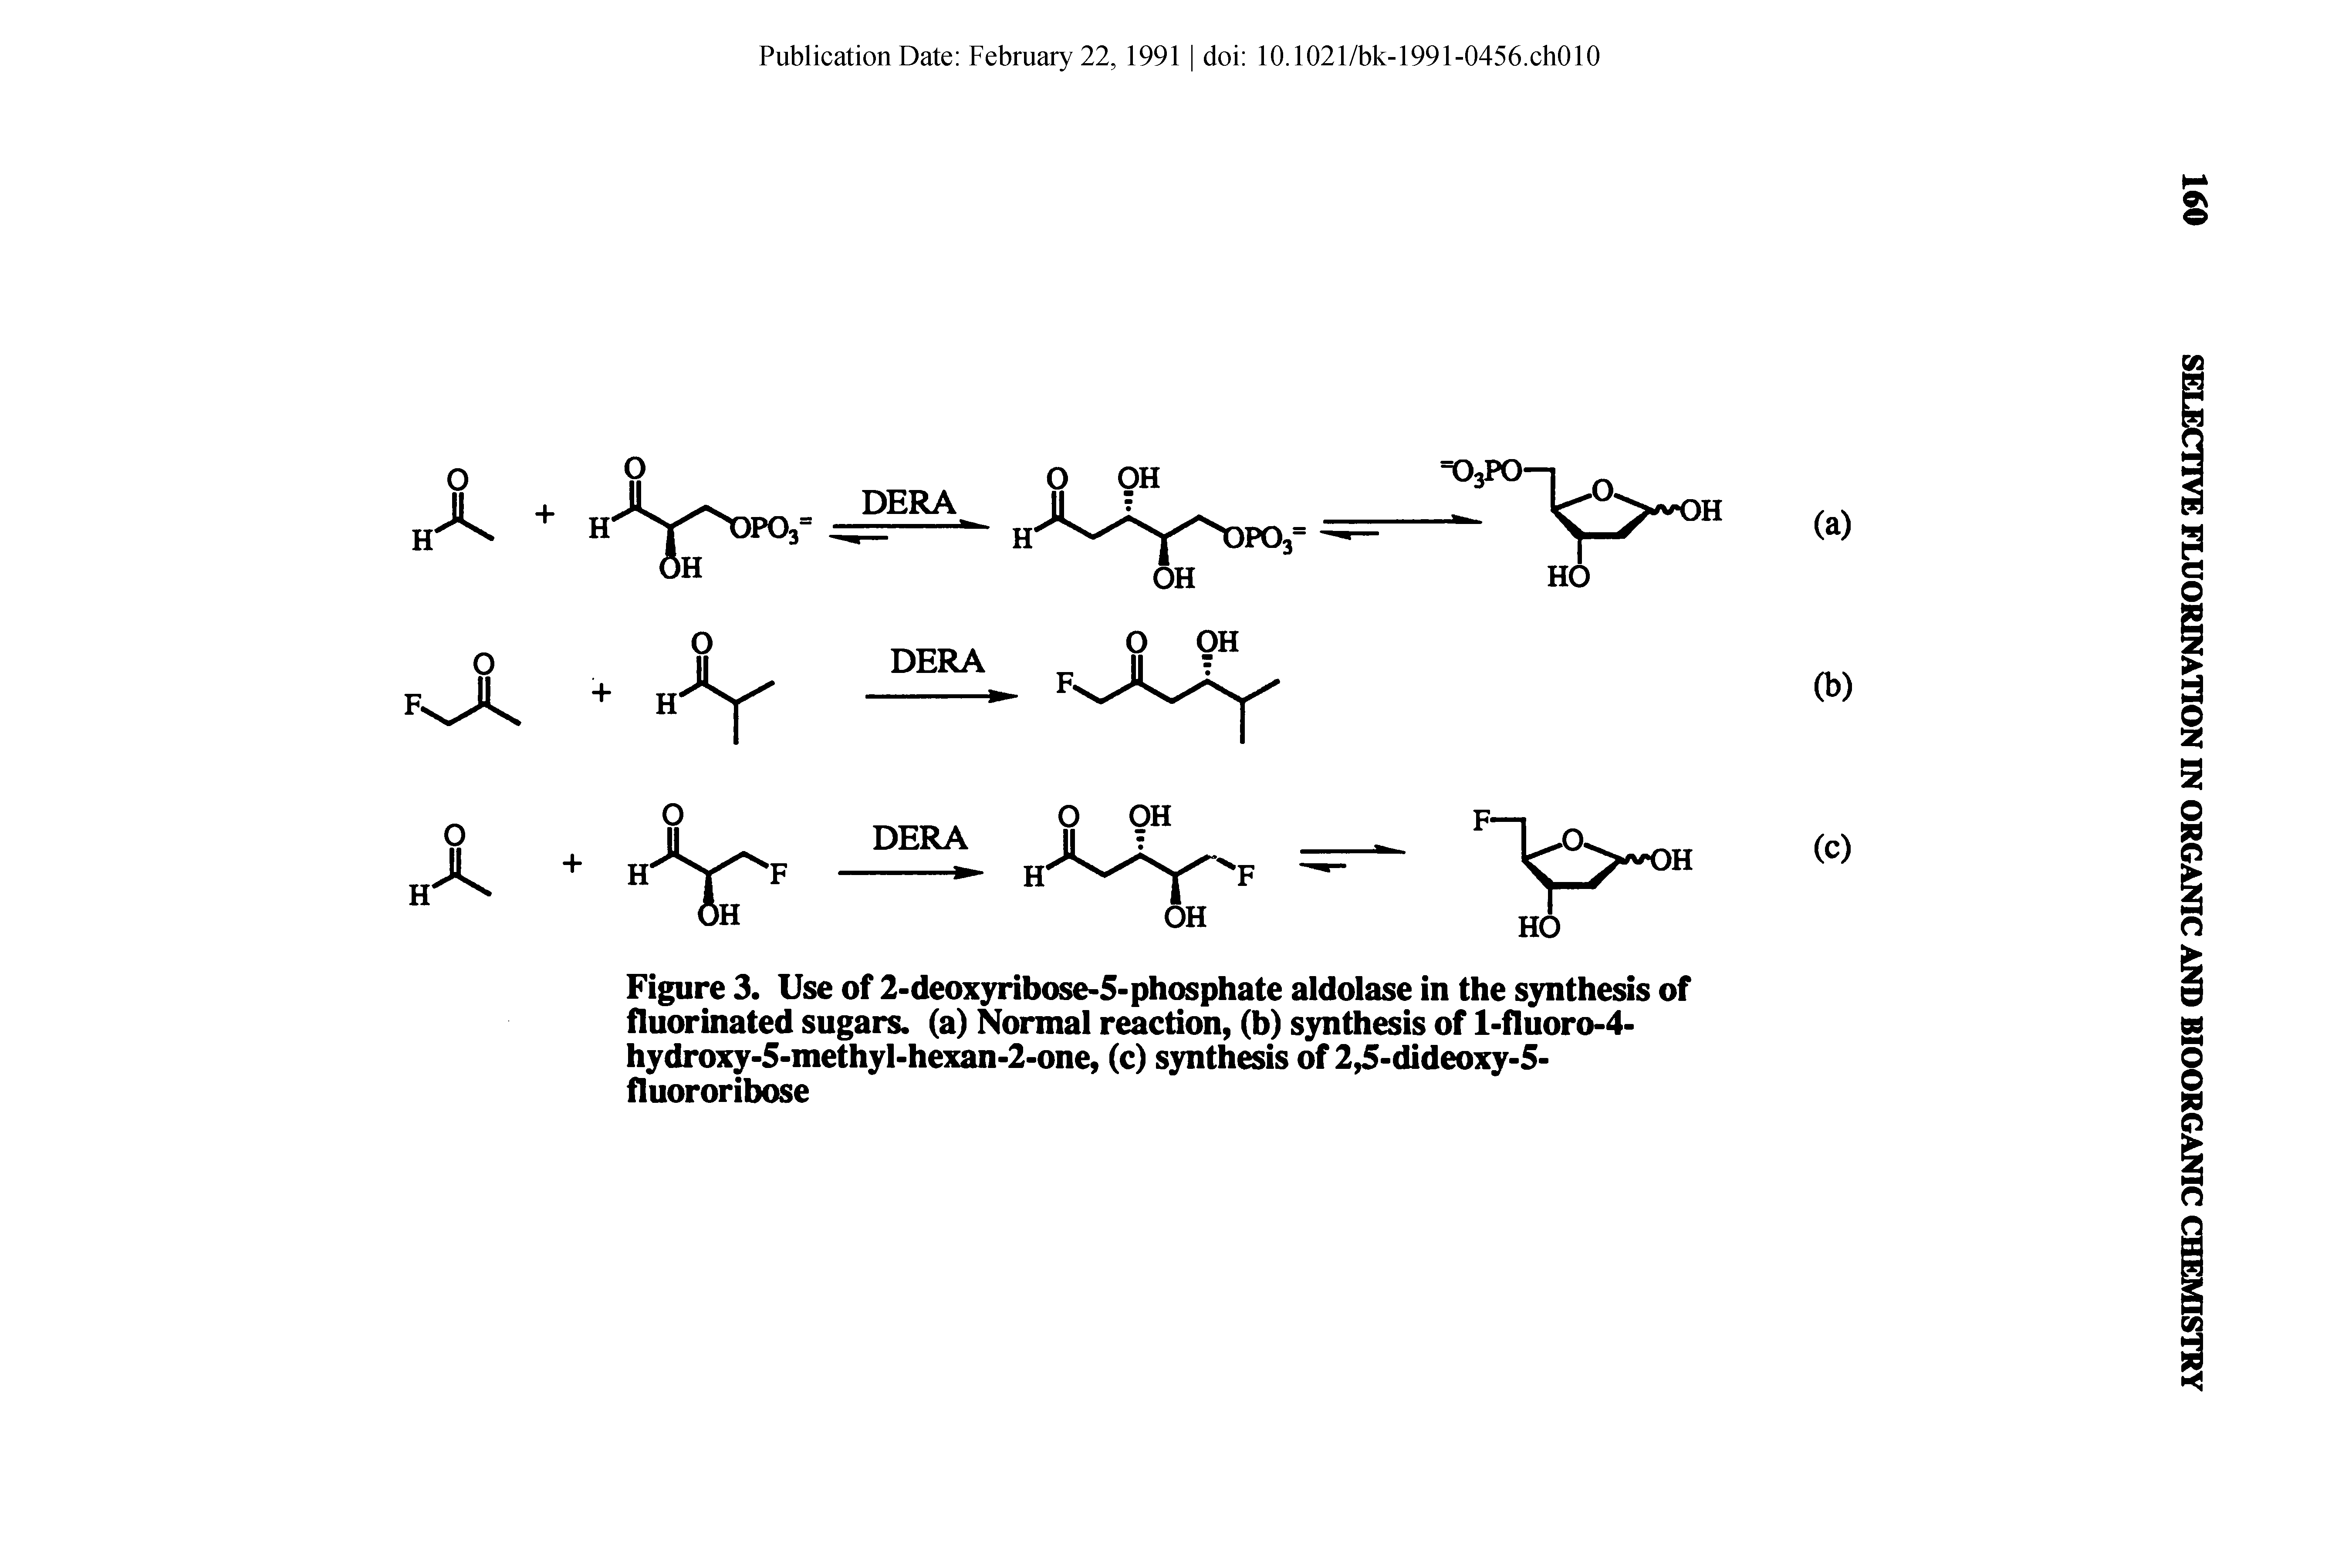 Figure 3. Use of 2-deoxyribose-5-phosphate aldolase in the synthesis of fluorinated sugars, (a) Normal reaction, (b) synthesis of l-fluoro-4-hydroxy-5-methyl-hexan-2-one, (c) synthesis of 2,5-dideoxy-5-fluororibose...